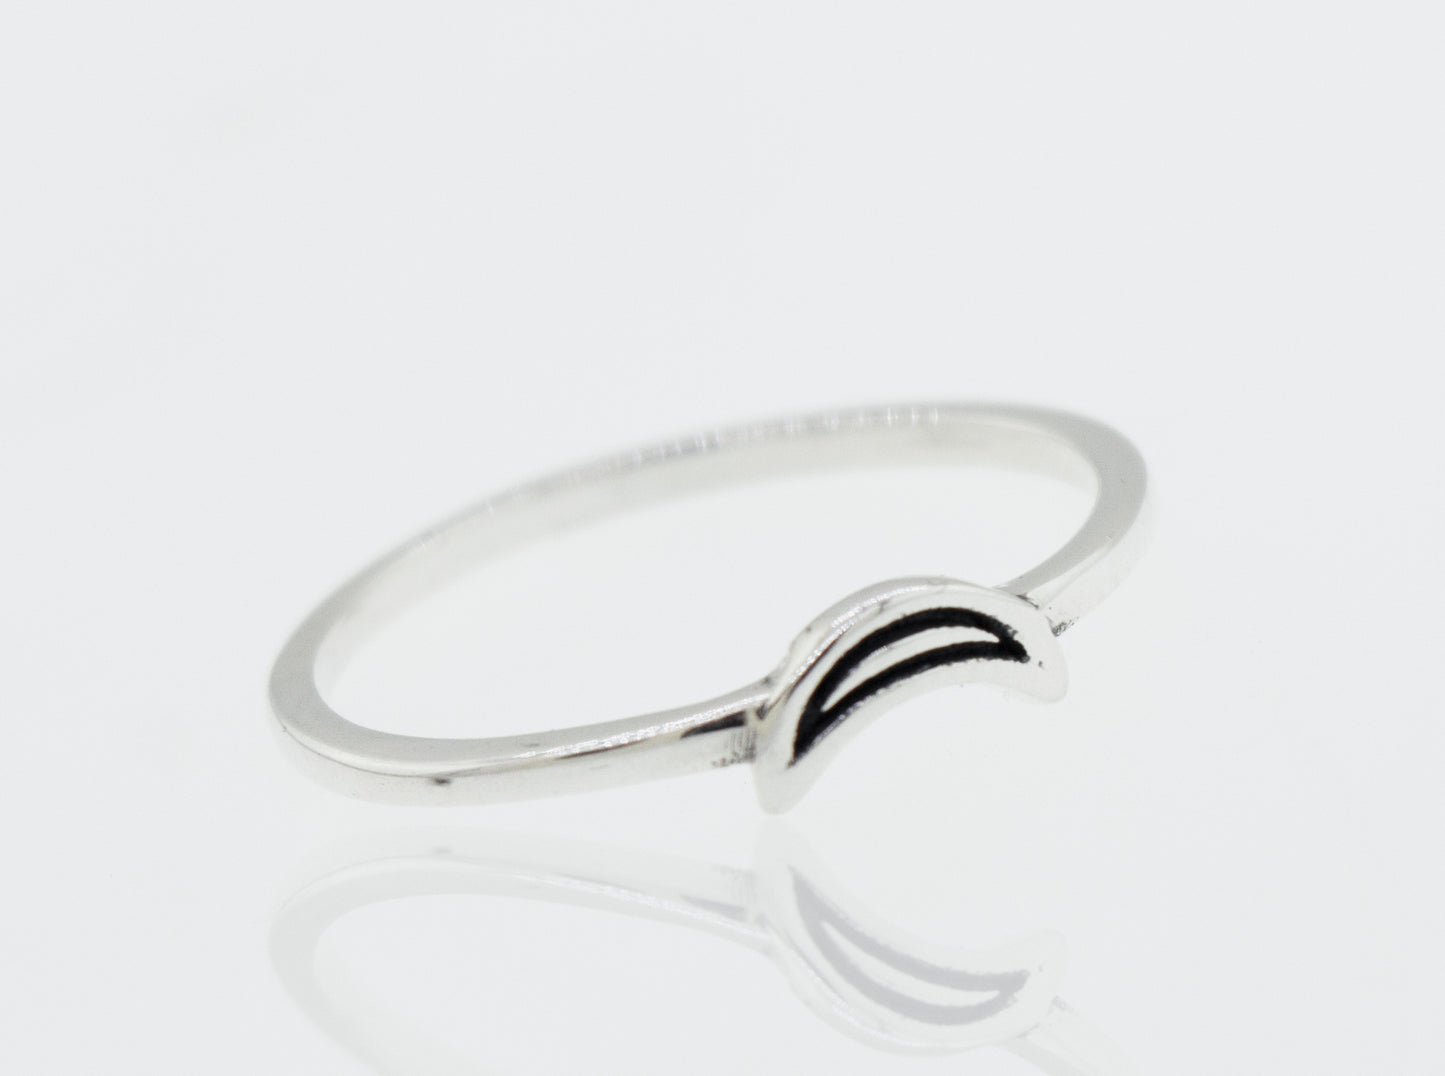 A Tiny Crescent Moon silver ring with a black and white design.